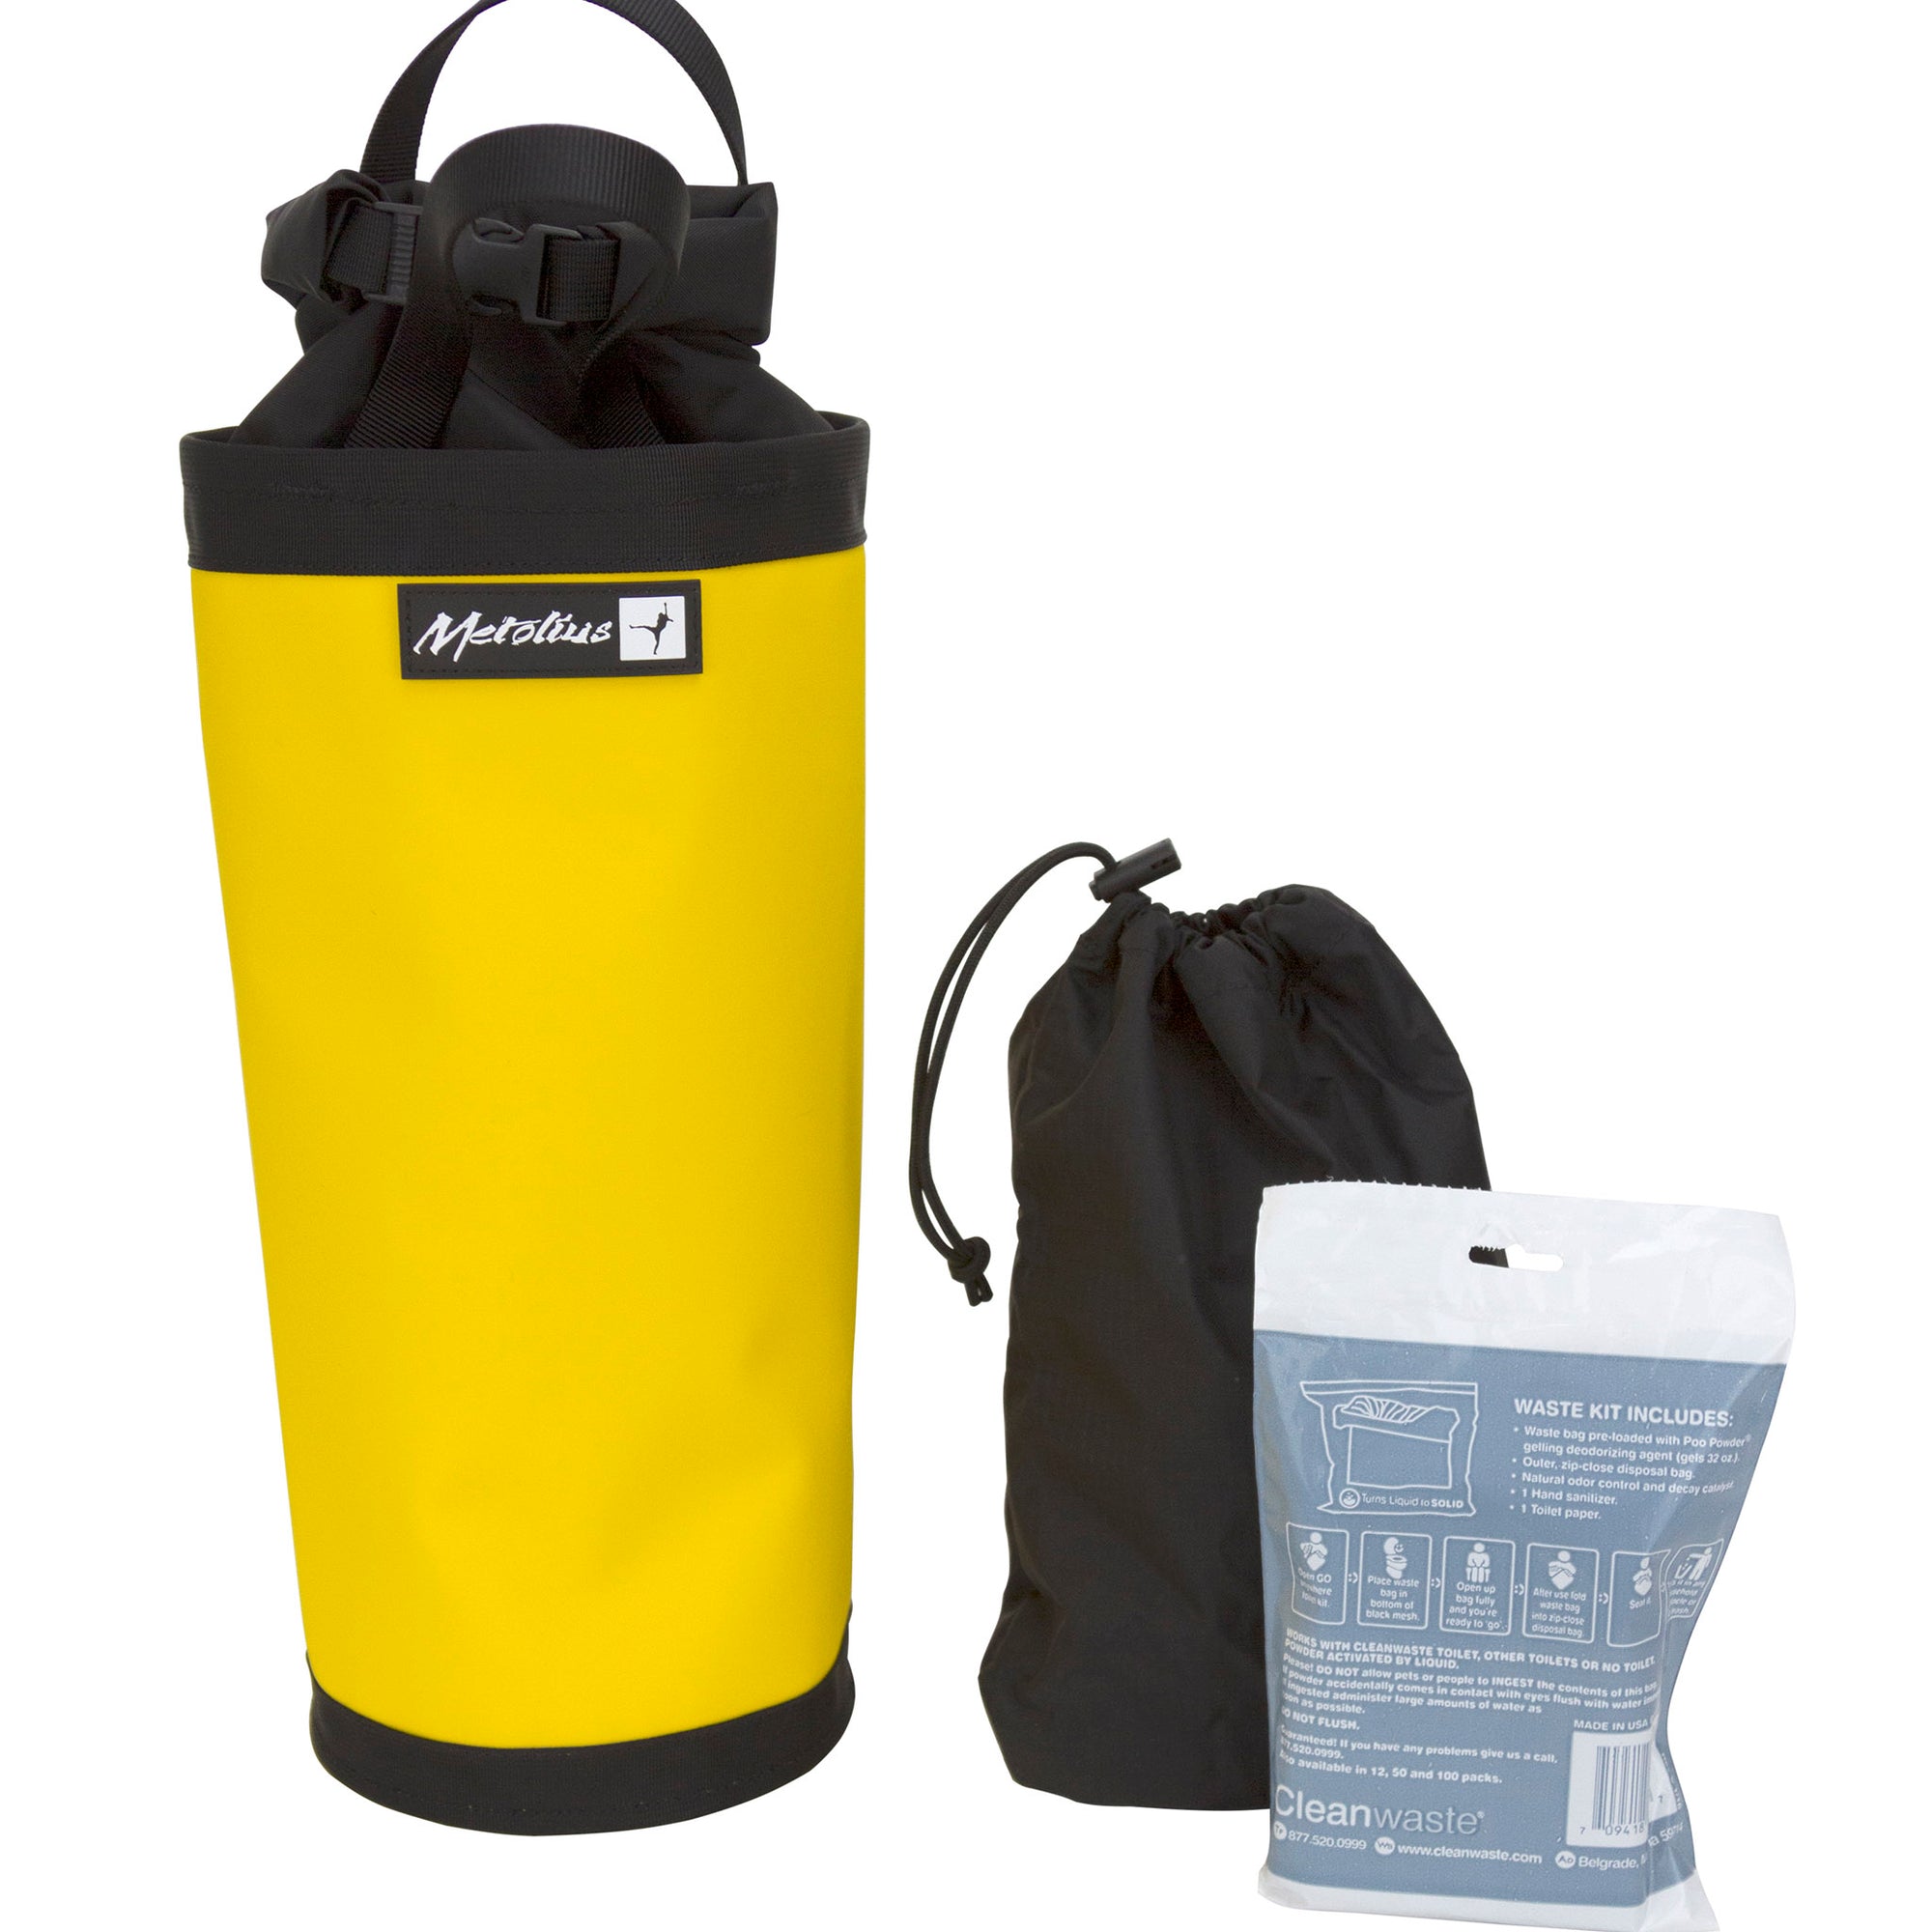 metolius waste case in a yellow color they call squash